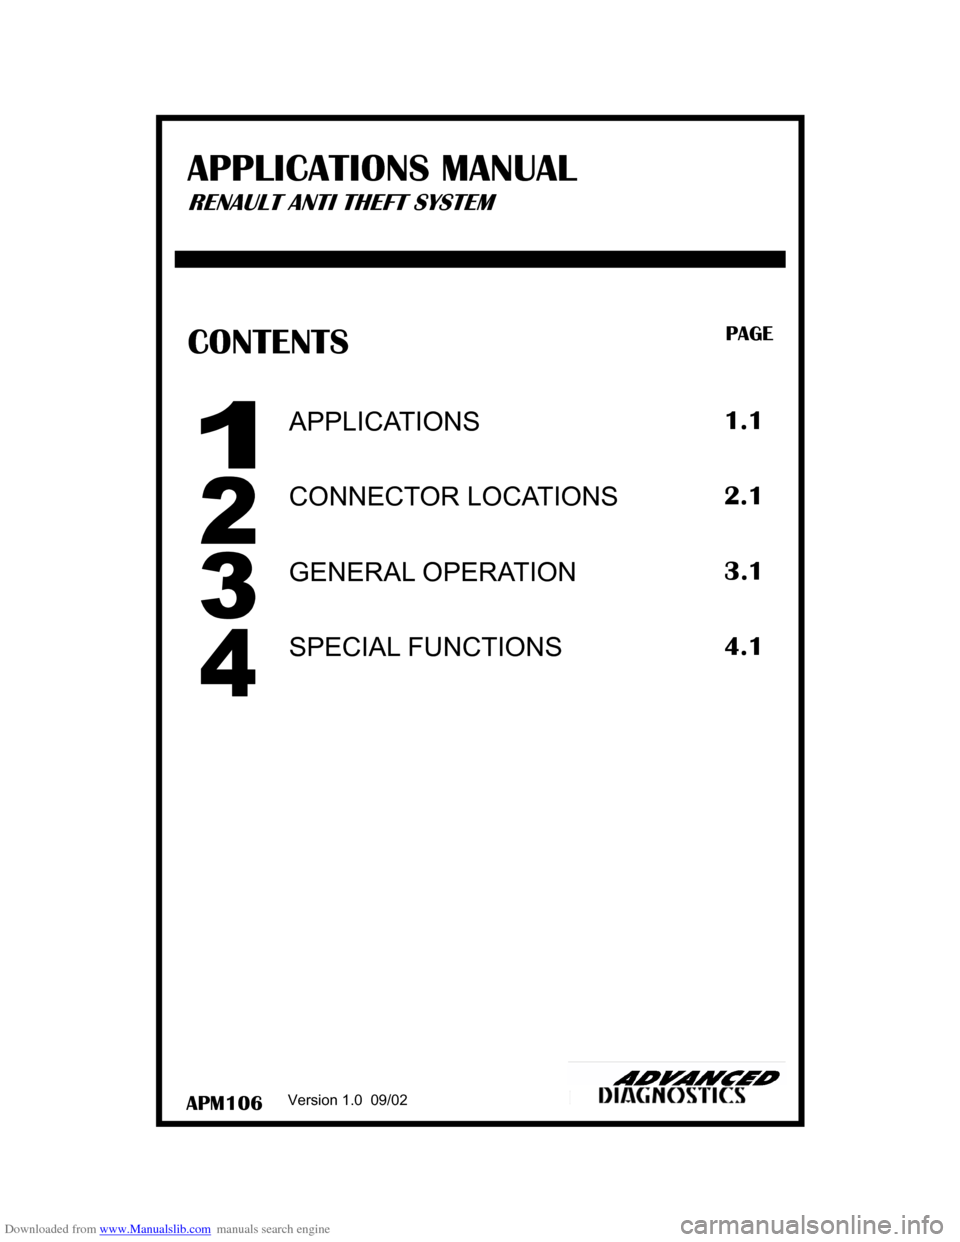 RENAULT CLIO 1997 X57 / 1.G Anti Theft System Manual Downloaded from www.Manualslib.com manuals search engine APM106 
CONTENTS PAGE 
Version 1.0  09/02 
SPECIAL FUNCTIONS 
APPLICATIONS 
CONNECTOR LOCATIONS 
GENERAL OPERATION 
1.1 
2.1 
3.1 
4.1 
APPLICA